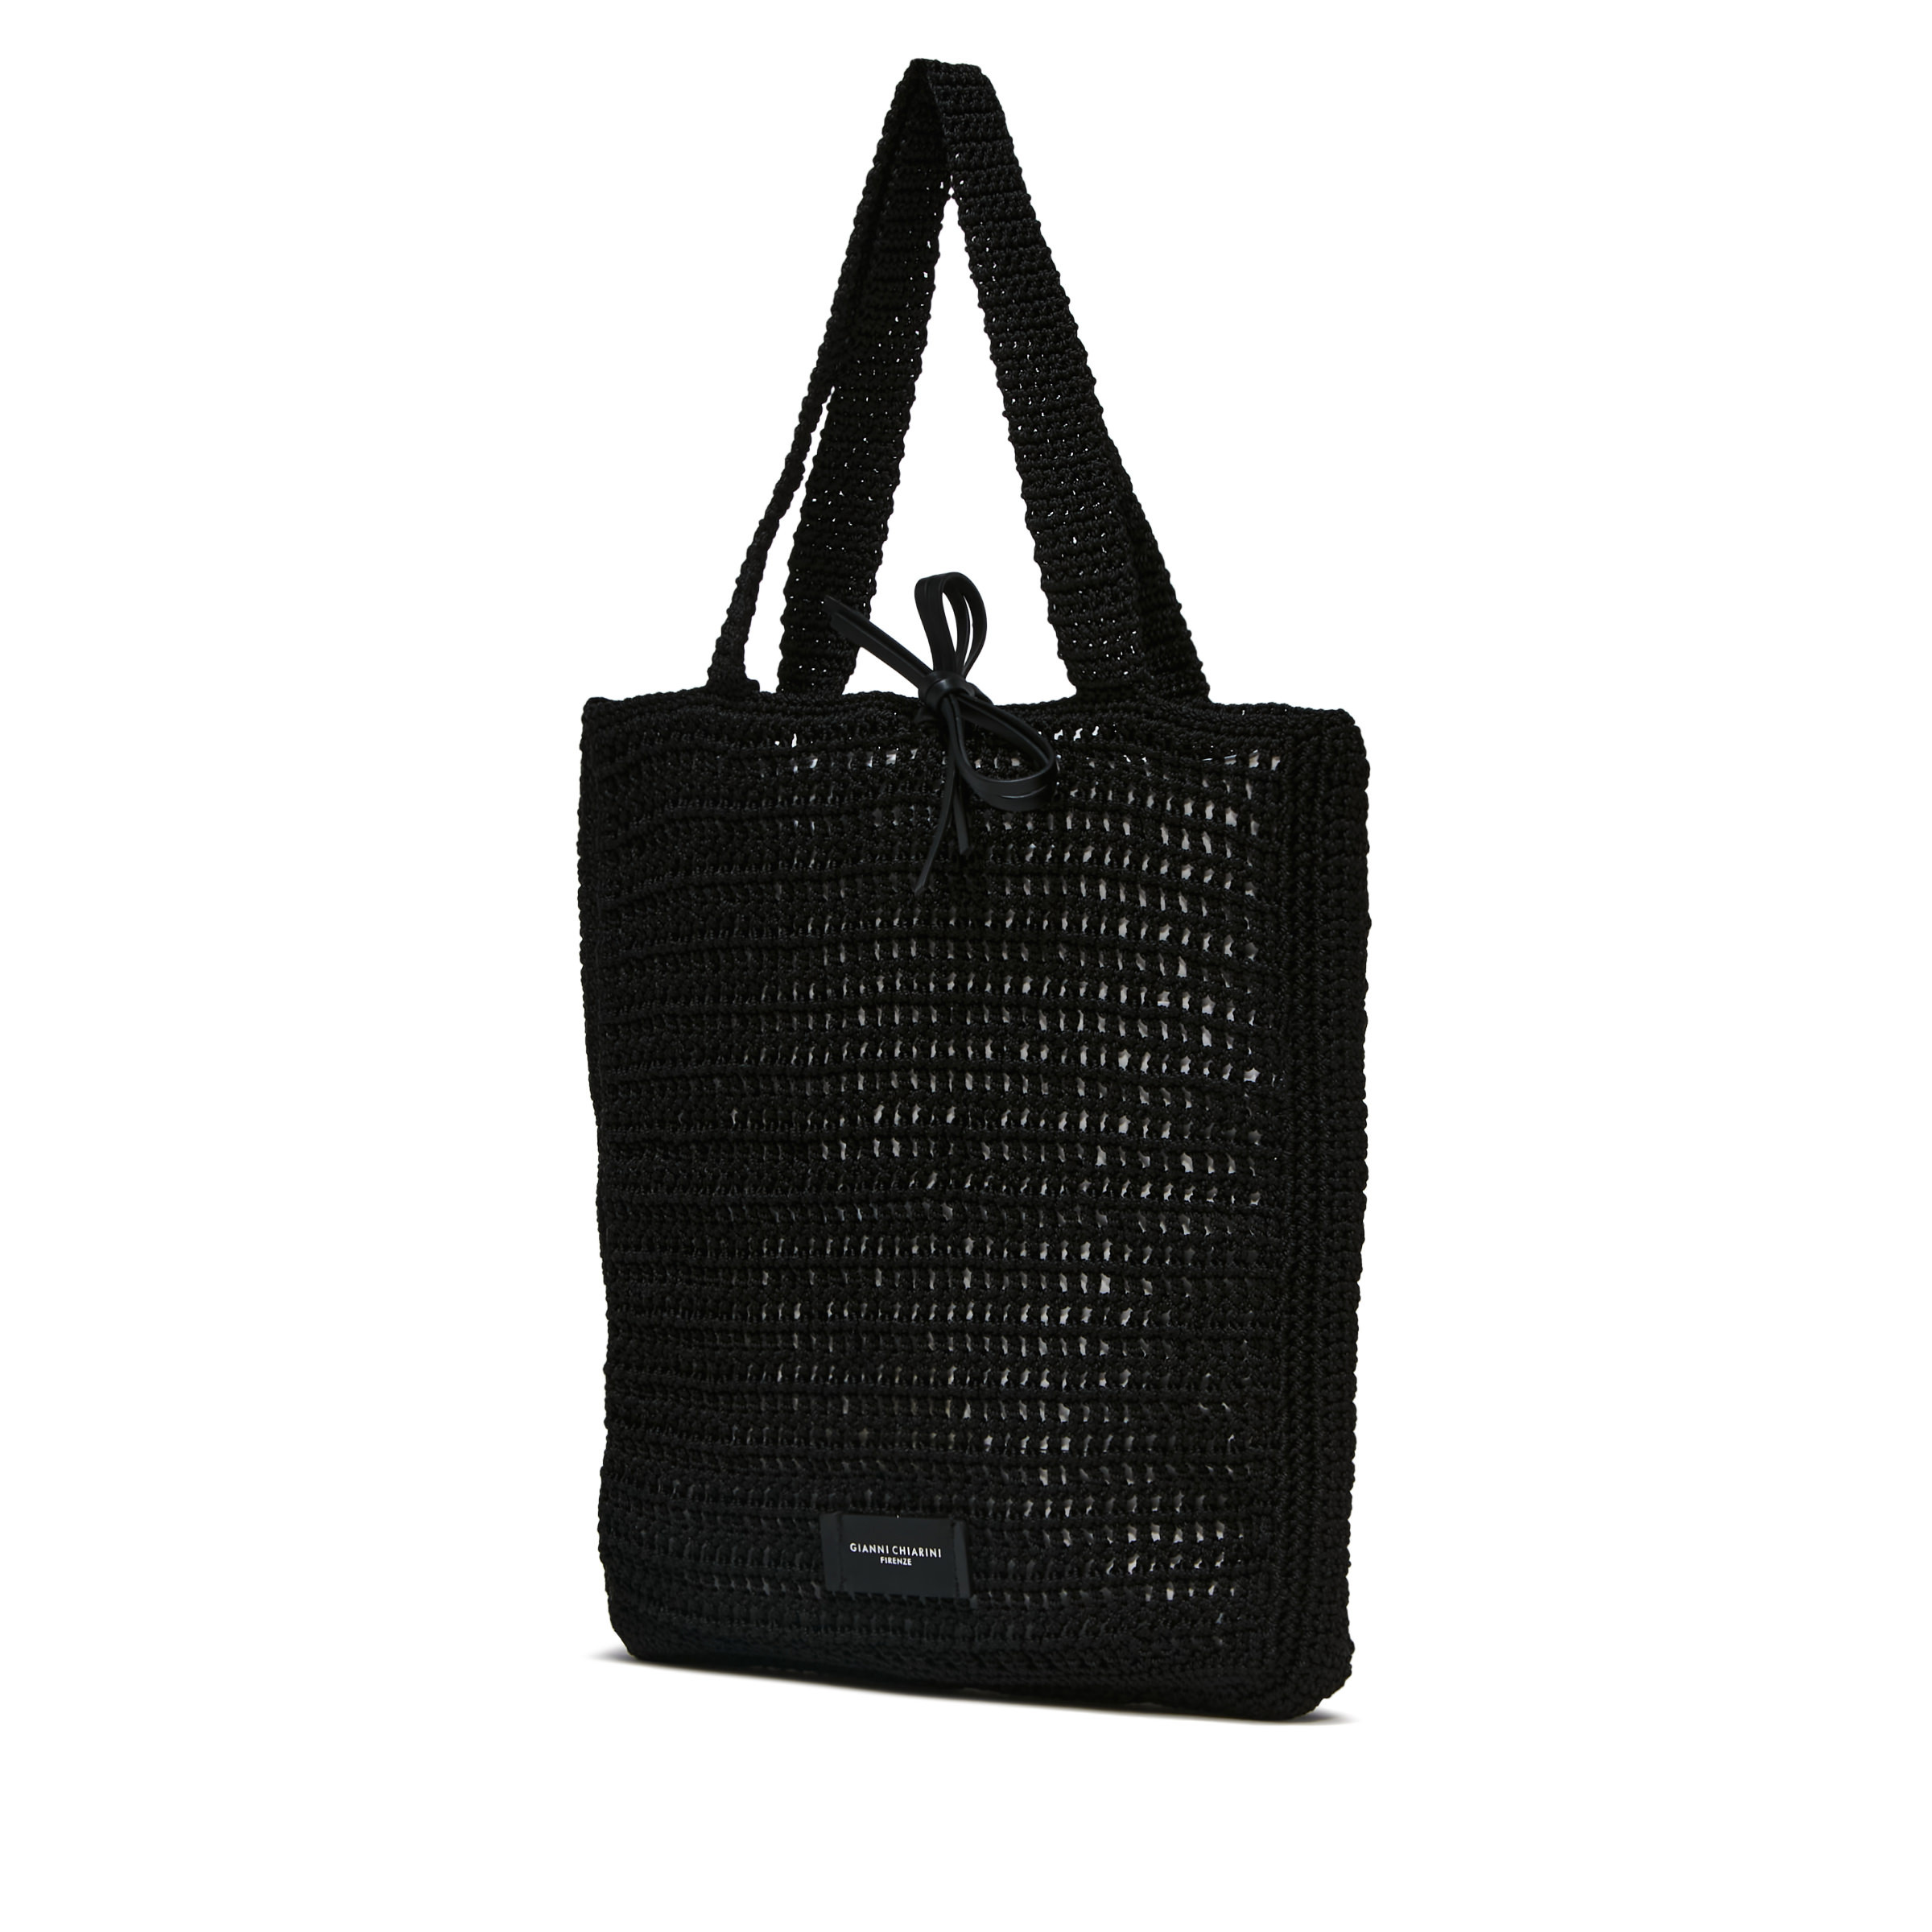 Gianni Chiarini - Victoria bag in leather and fabric, Black, large image number 3